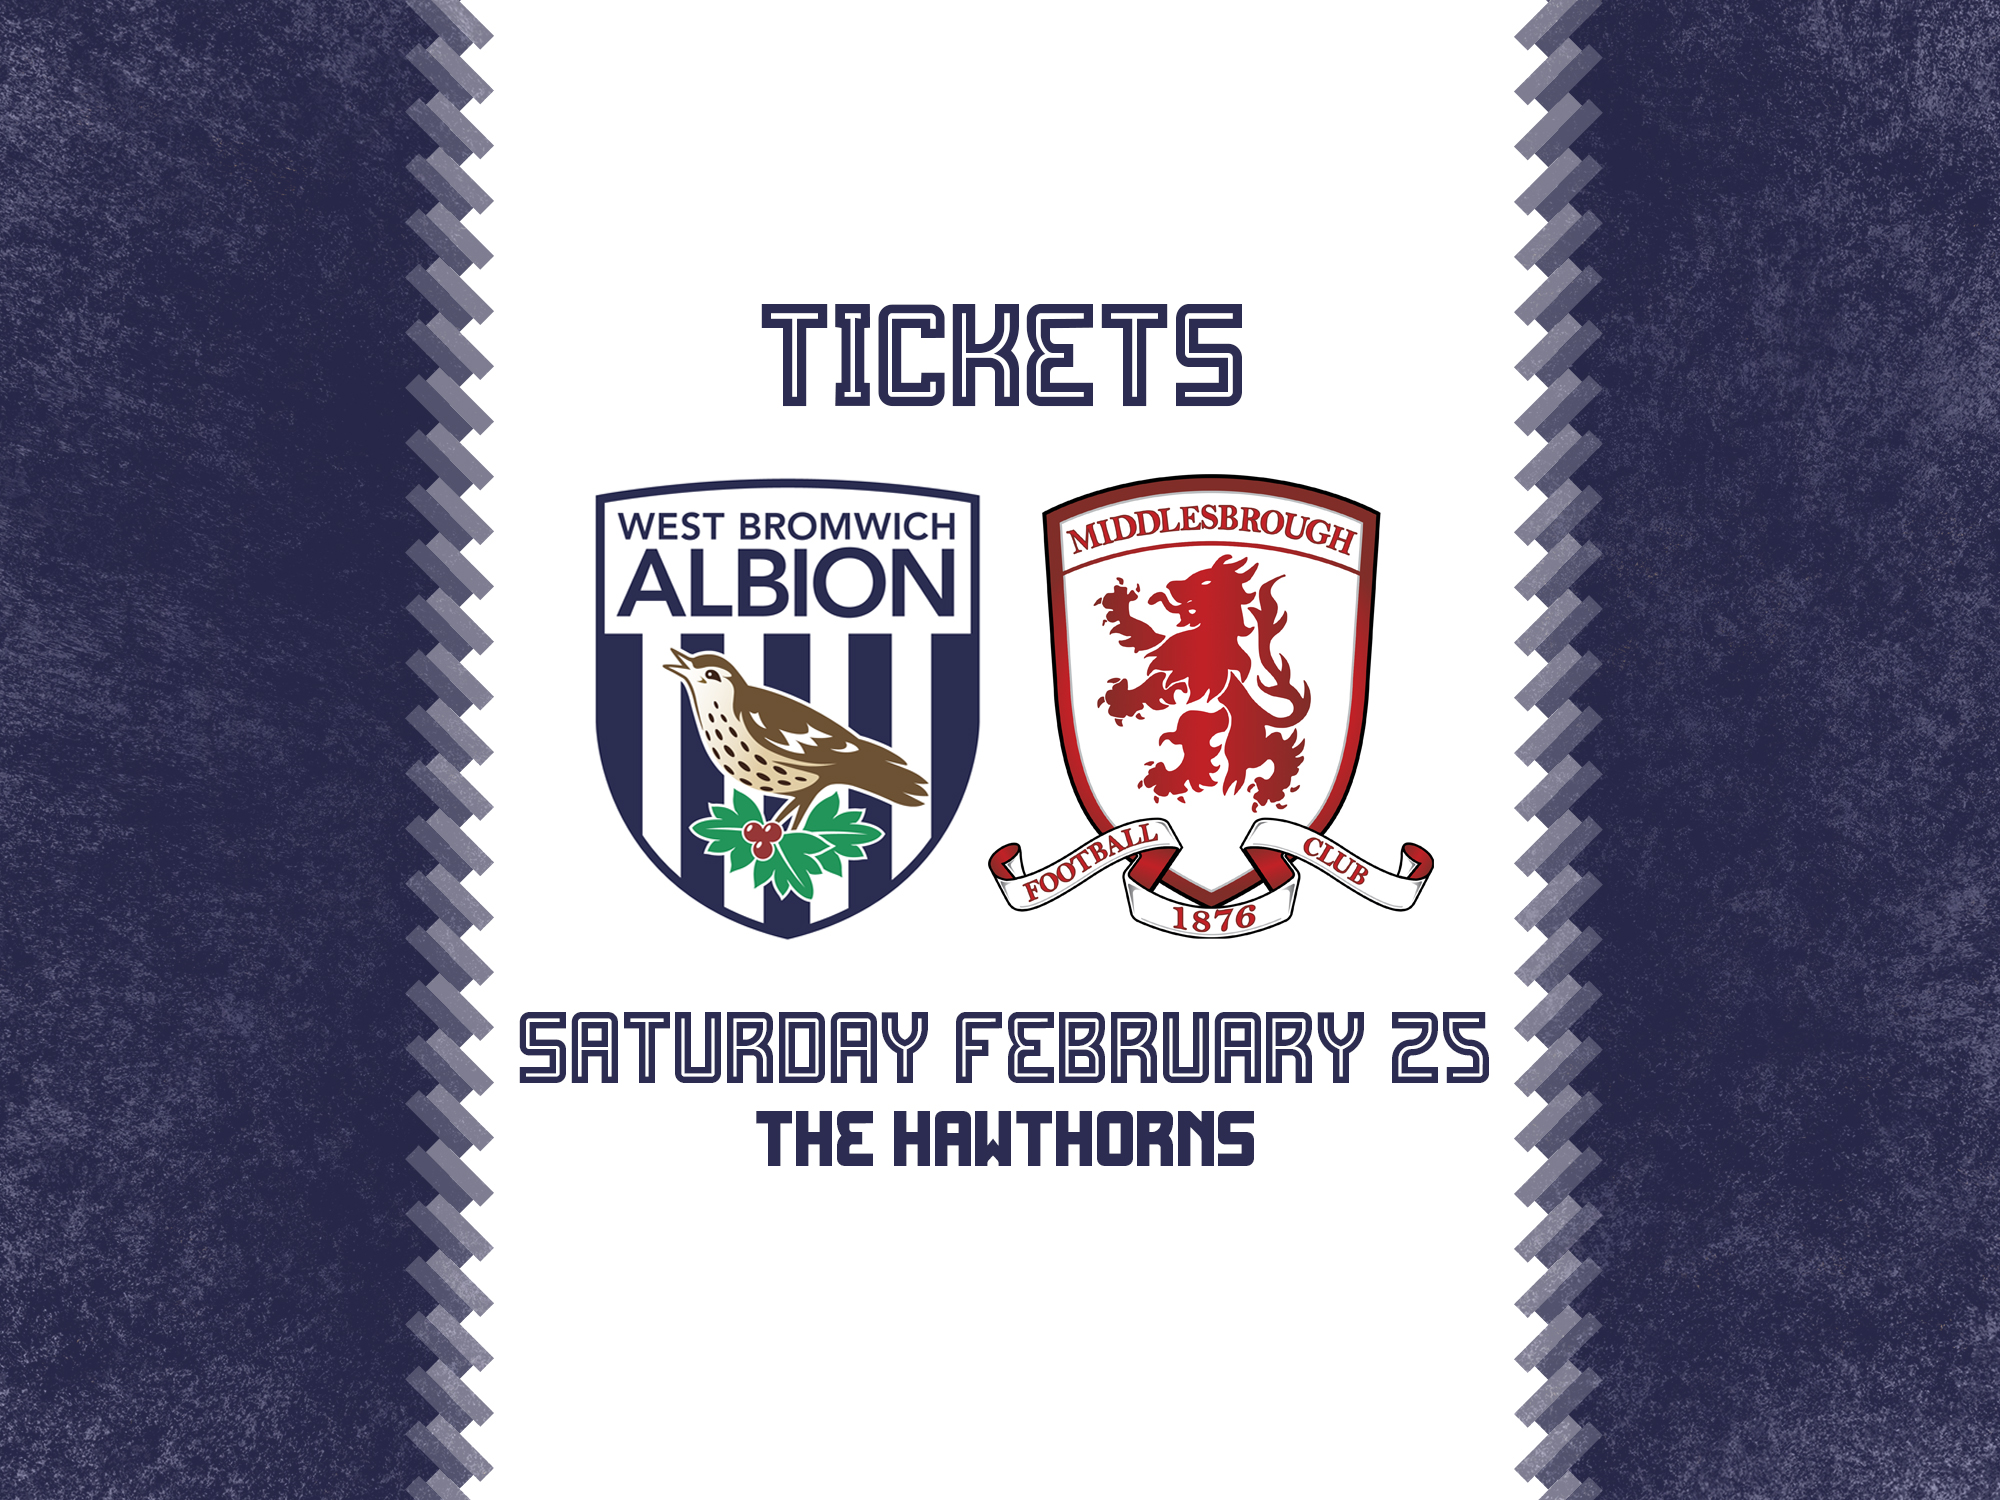 A ticket graphic for Albion's home game against Middlesbrough